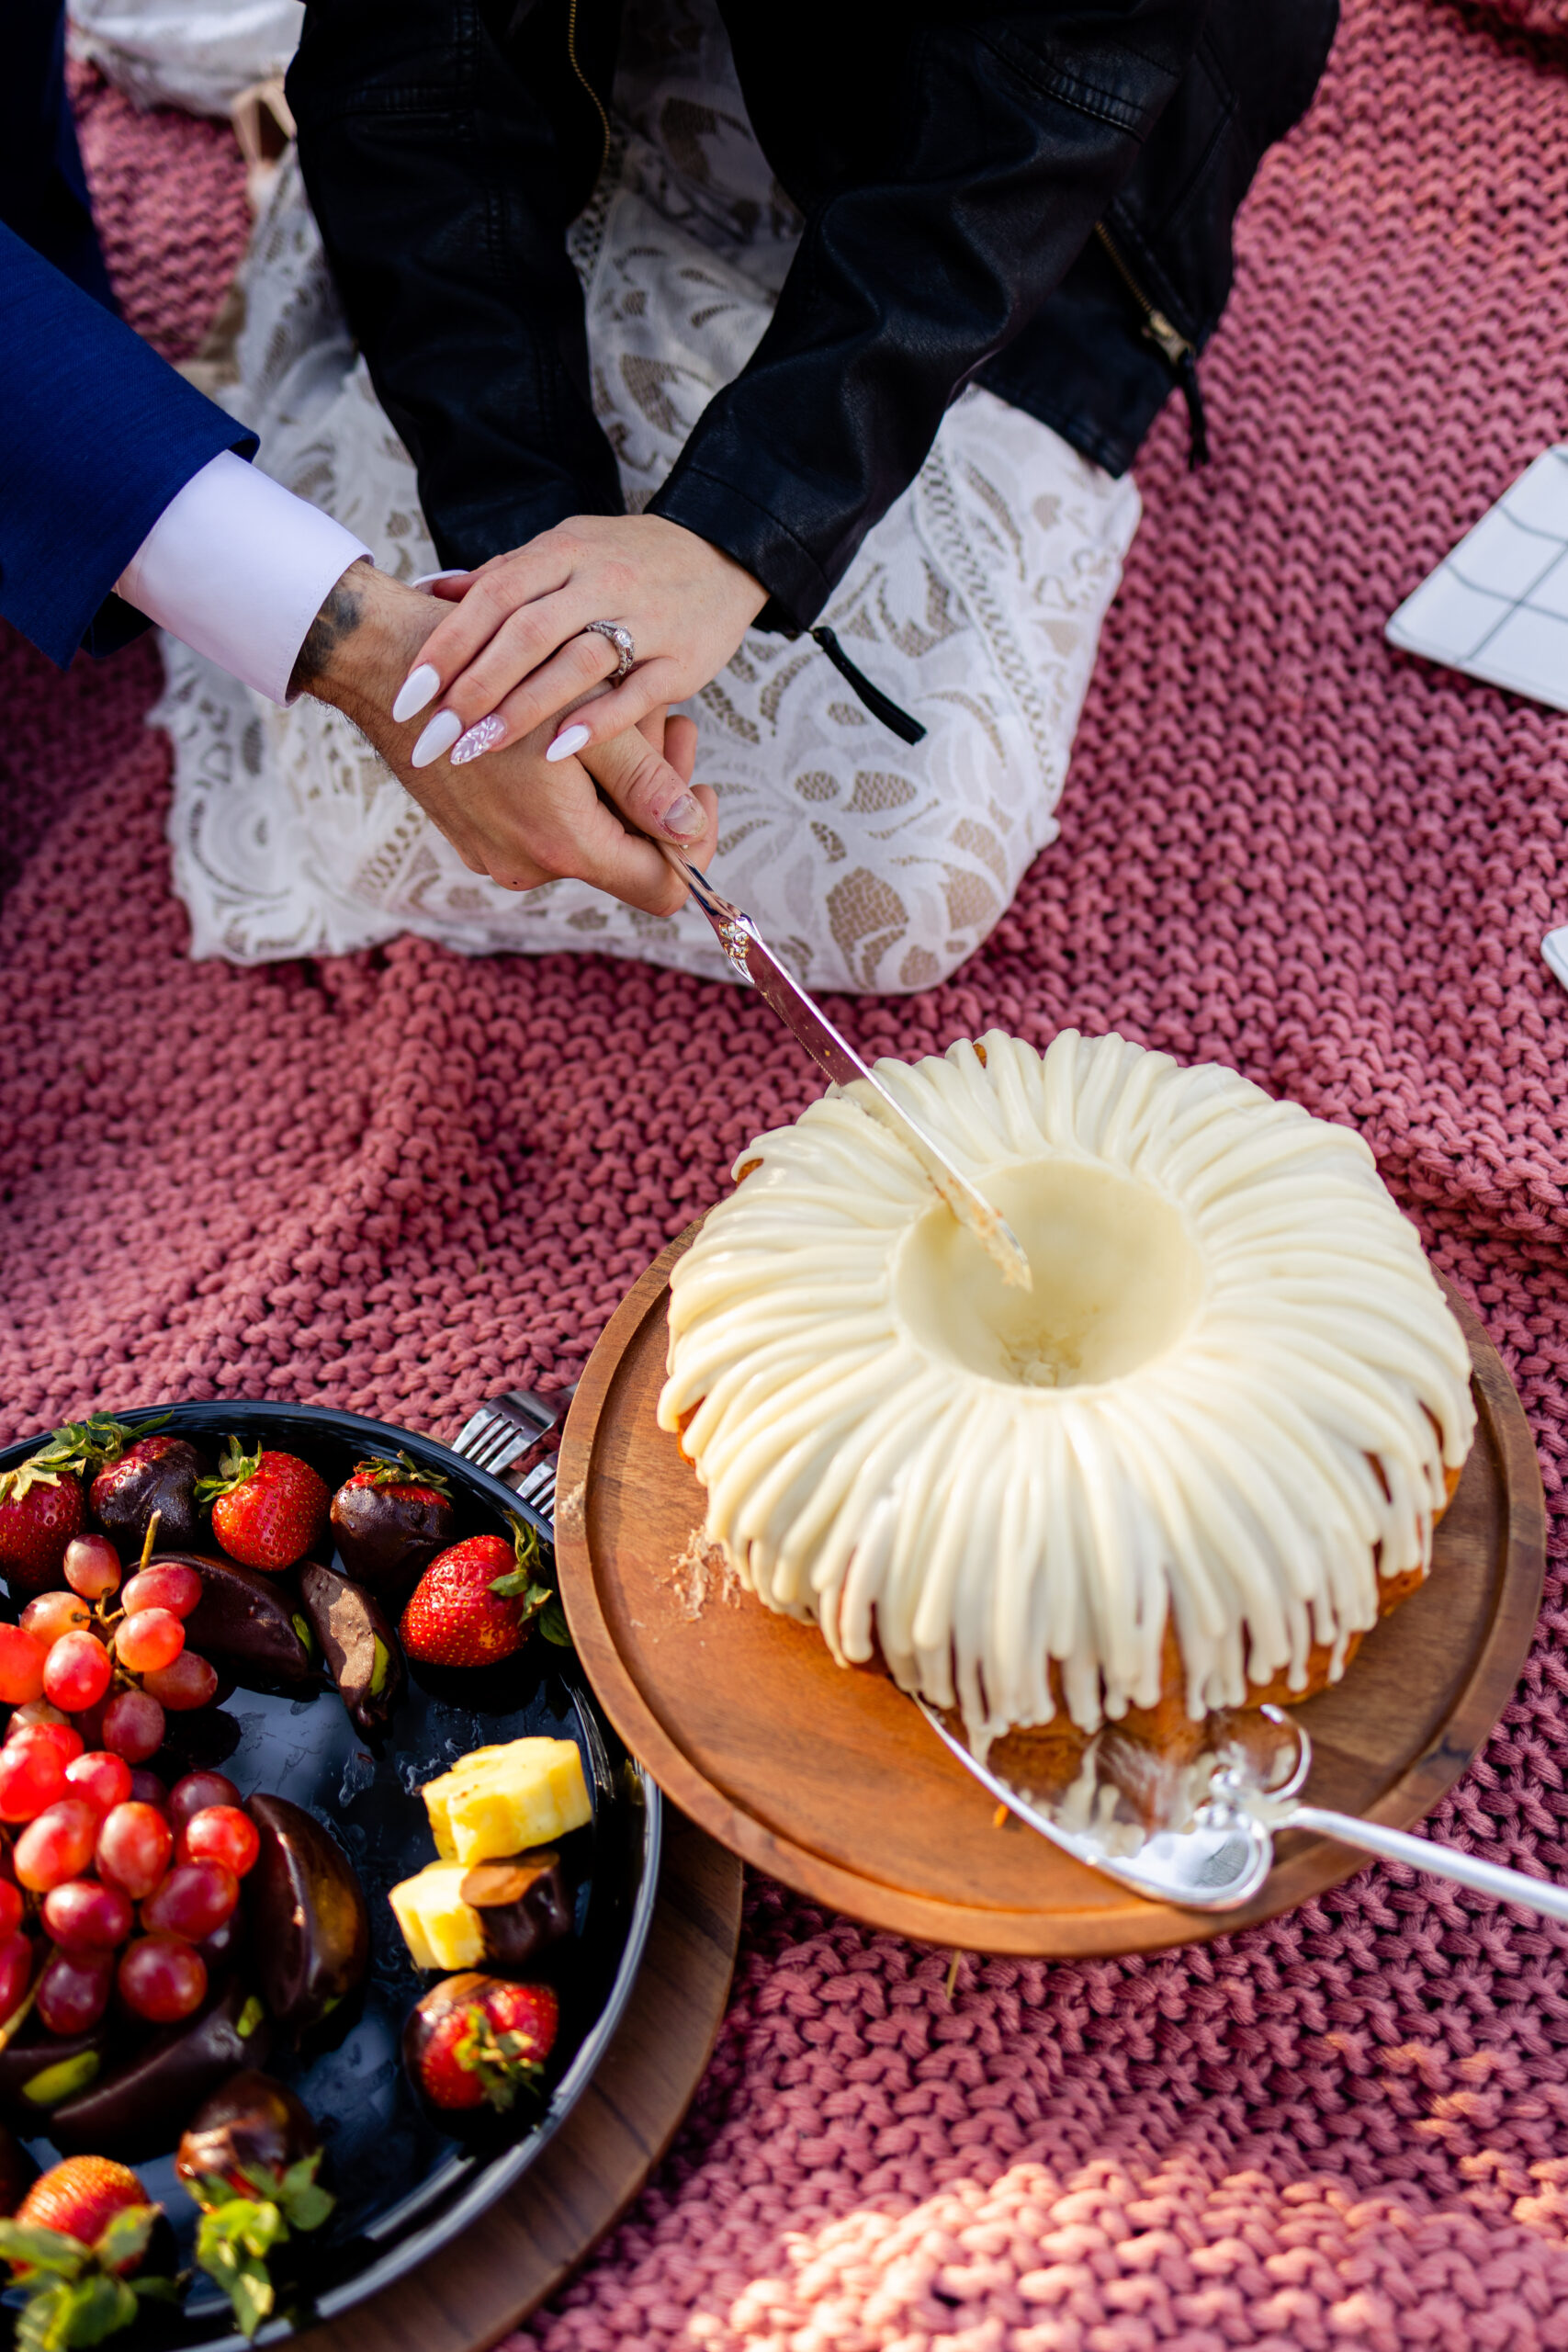 An up close shot of the cake and treats during their picnic at Artist Point after their Sunrise Amphitheater elopement ceremony. 